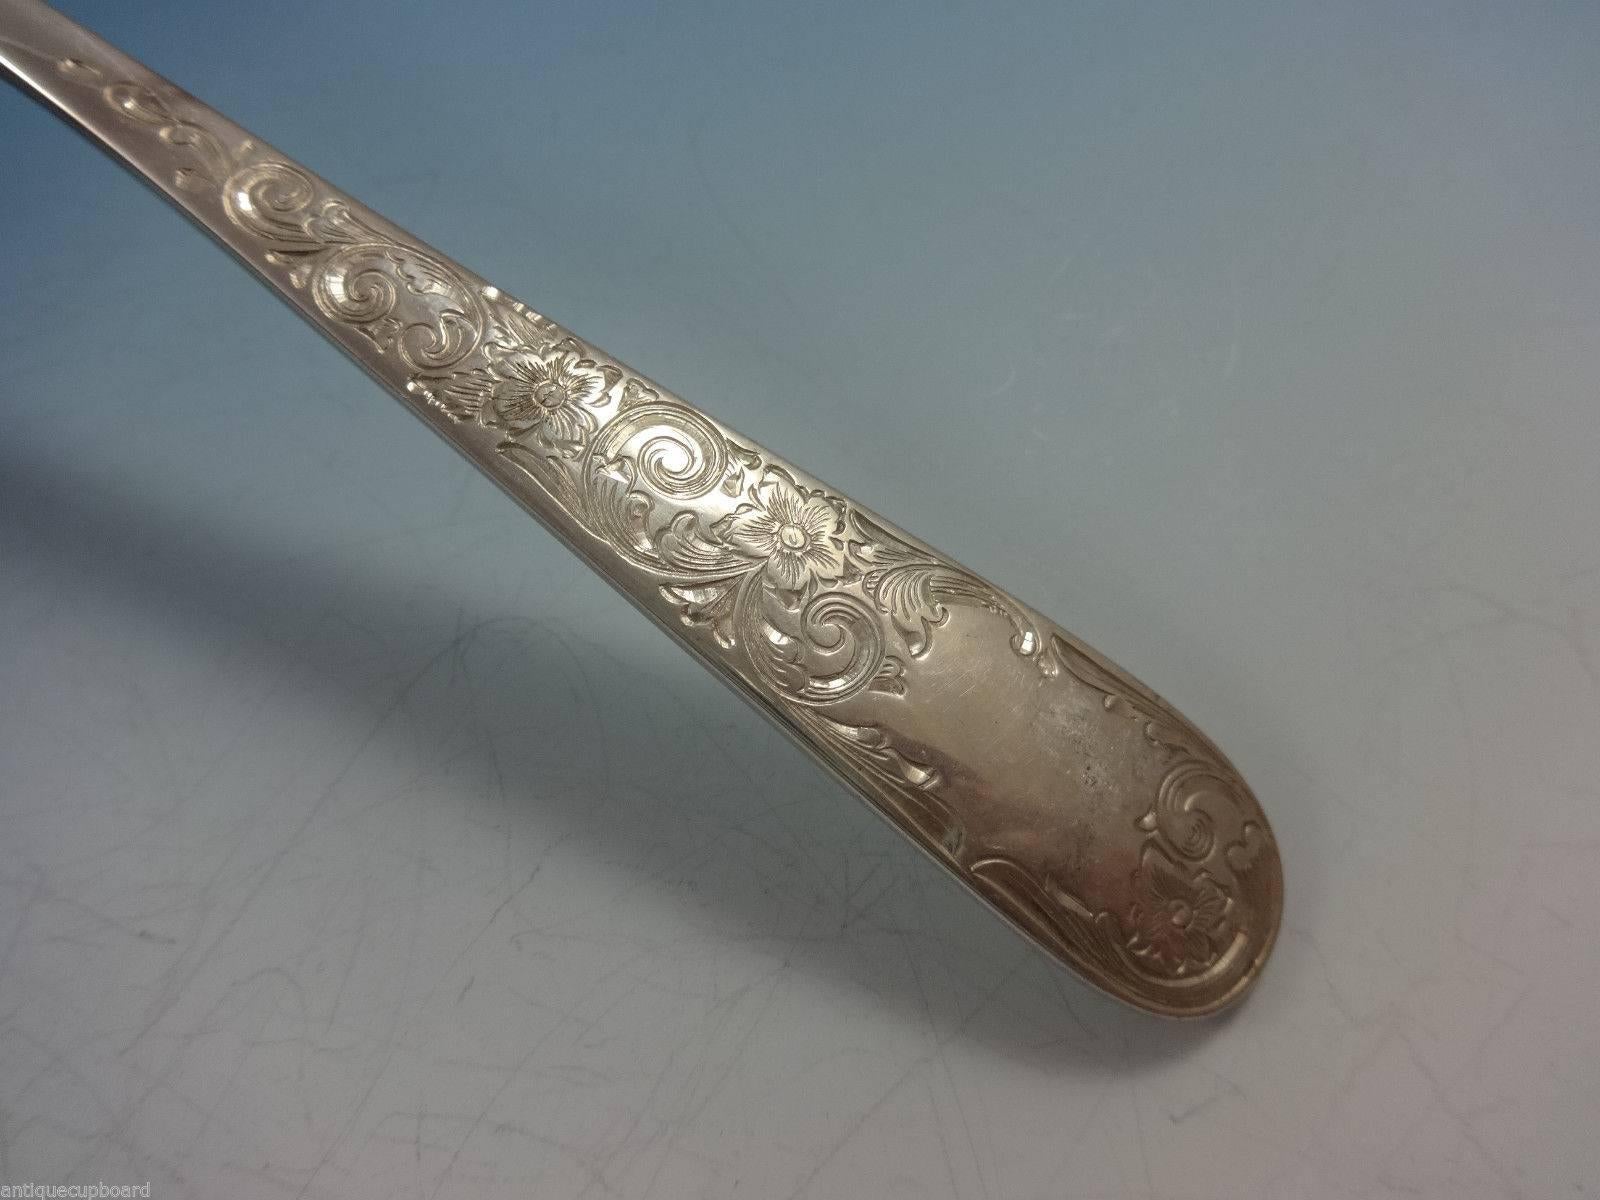 The simple curved handle and slim stem of this elegantly understated design belie the intricate carved detailing along the length of this pattern. First crafted in 1936, the complex scrolling and floral motif gives way to a smooth crest near the tip